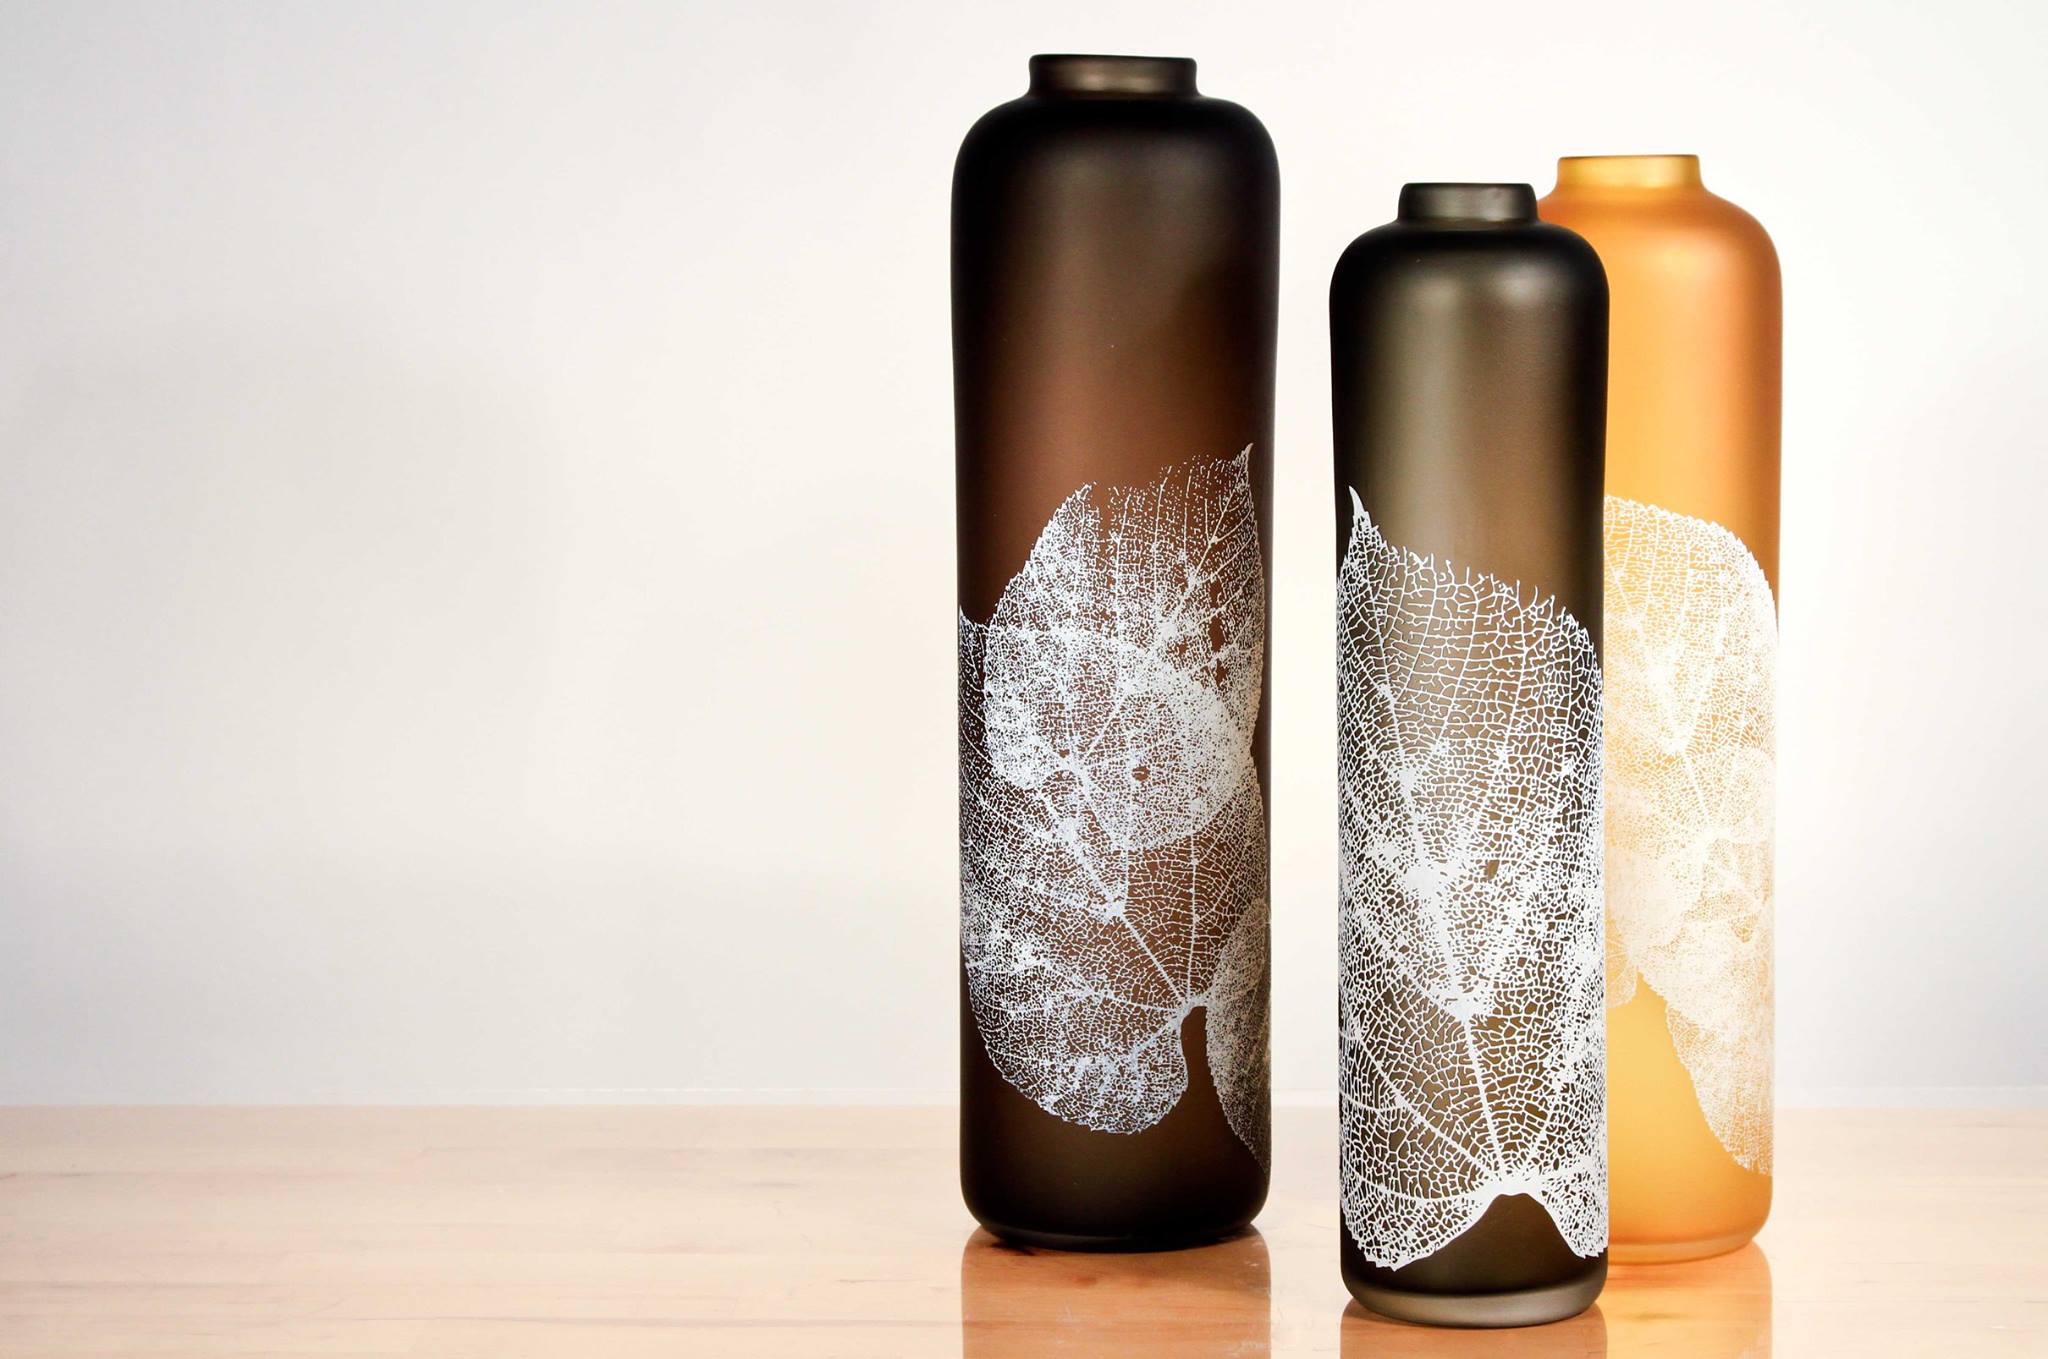 Glass vessels with sandblasted leaf detail by Nick Chase